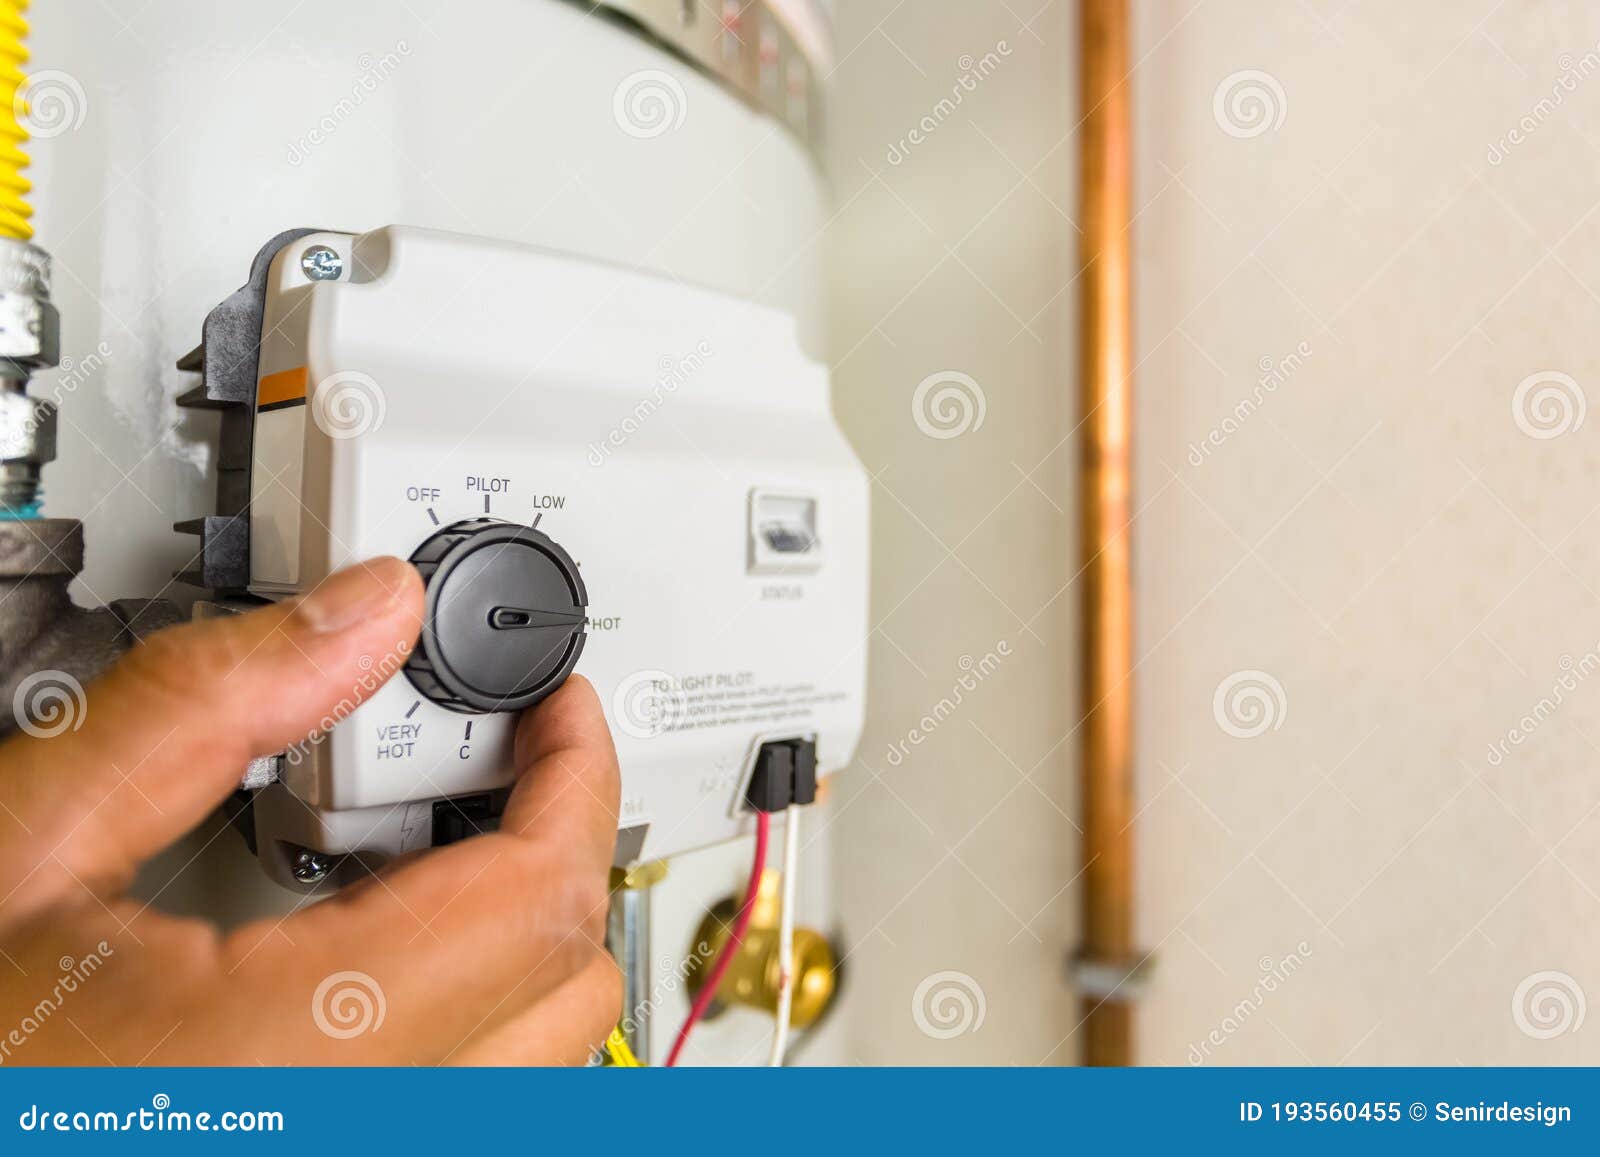 Hot Water Heater Control Thermostat SD 4533 Stock Image - Image of